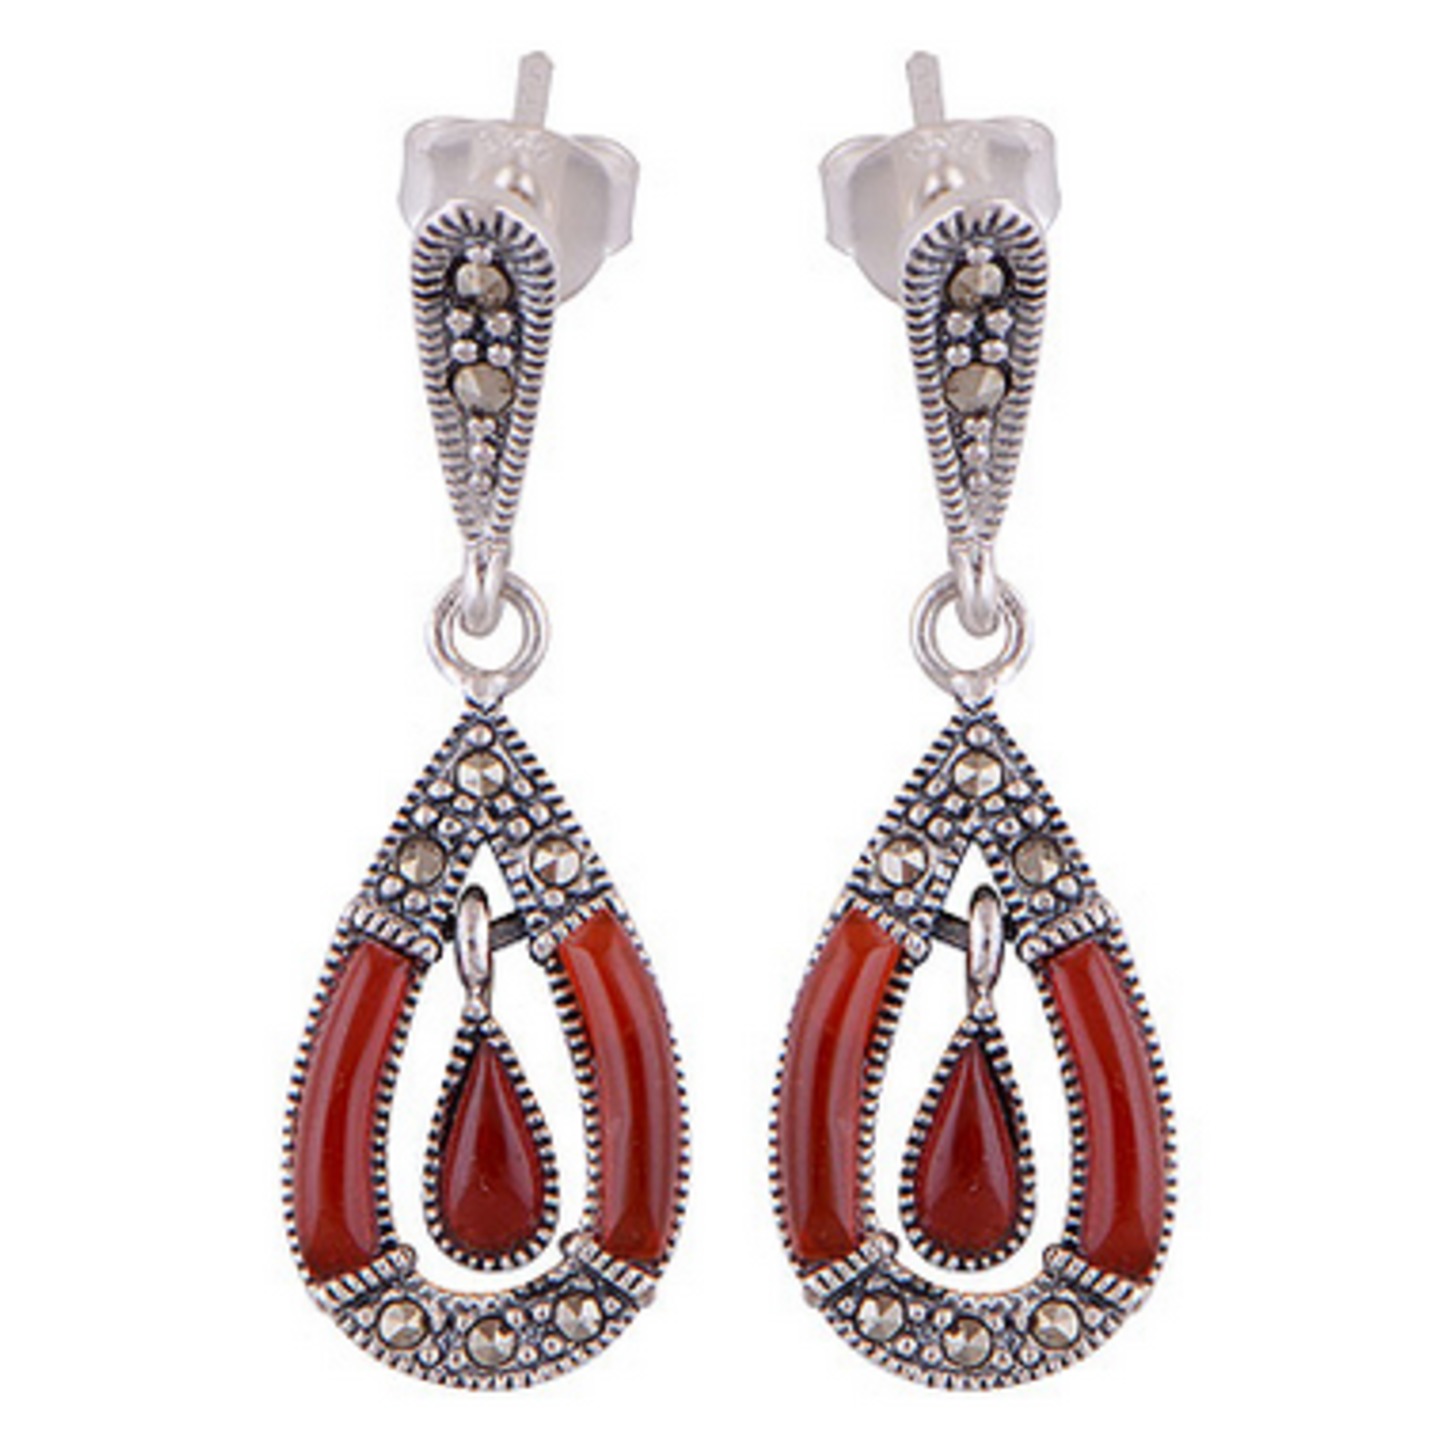 The Cherry Drop Marcasite Silver Earrings